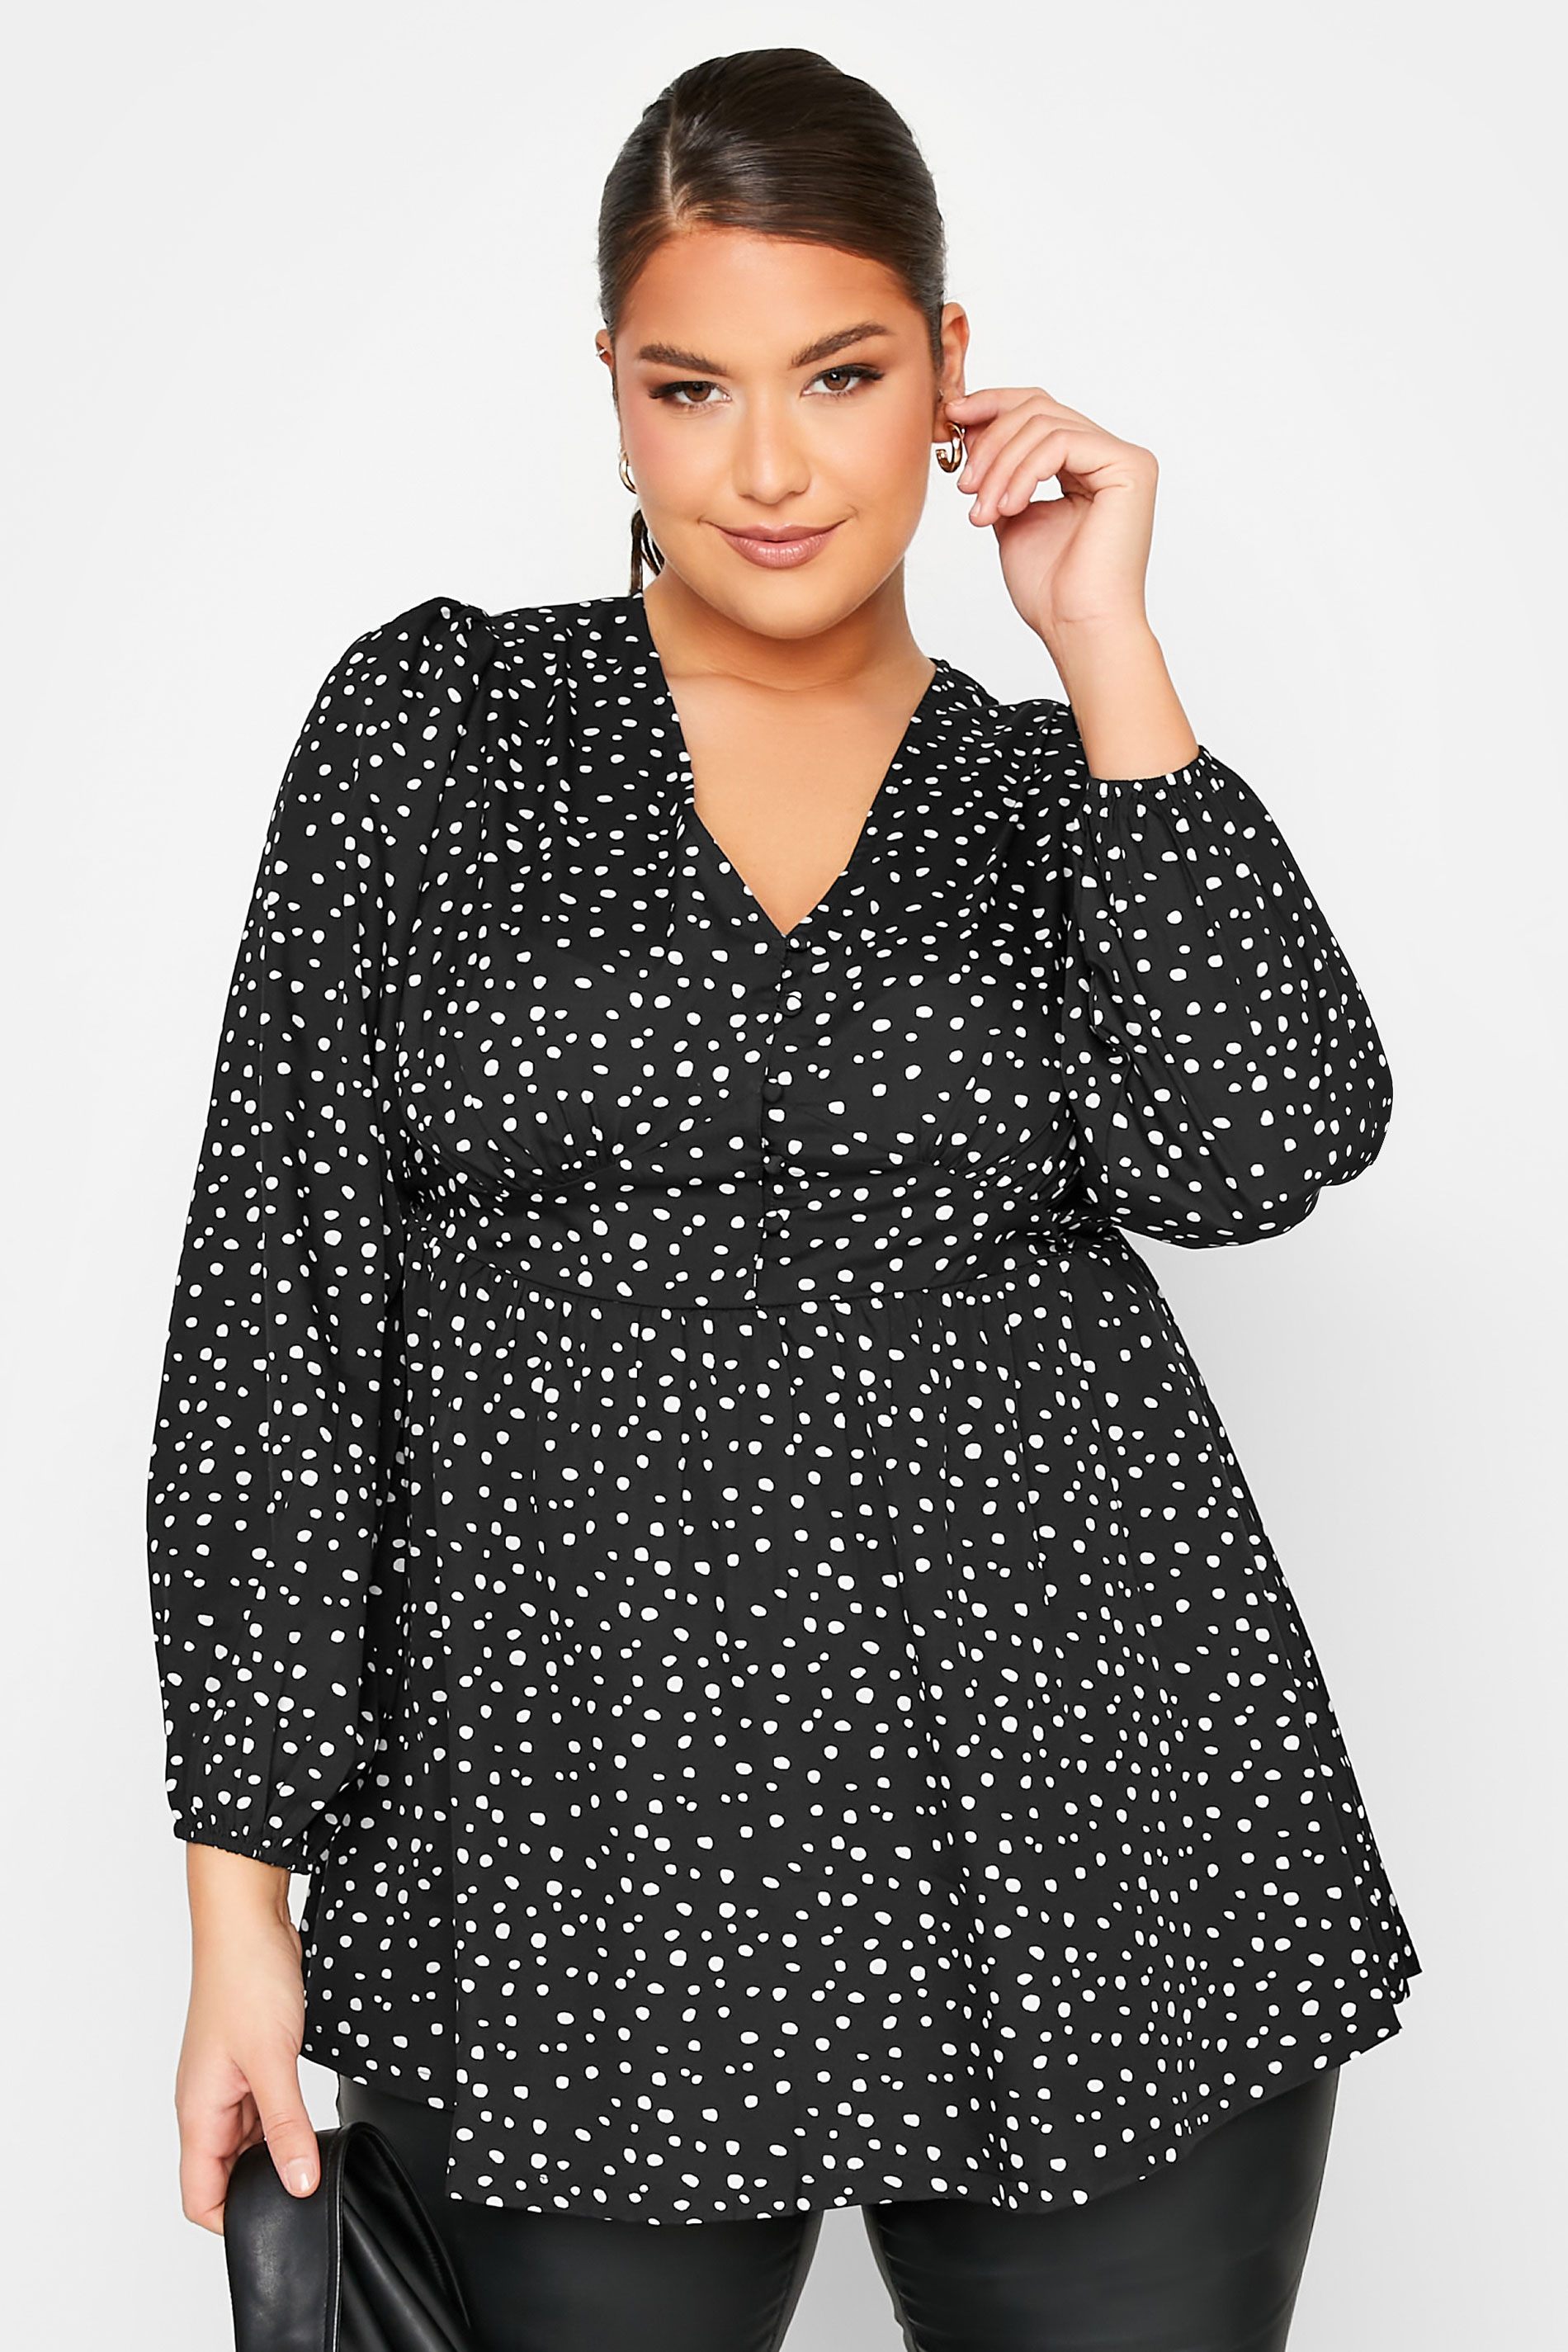 LIMITED COLLECTION Plus Size Black & White Spot Print Blouse | Yours Clothing 1